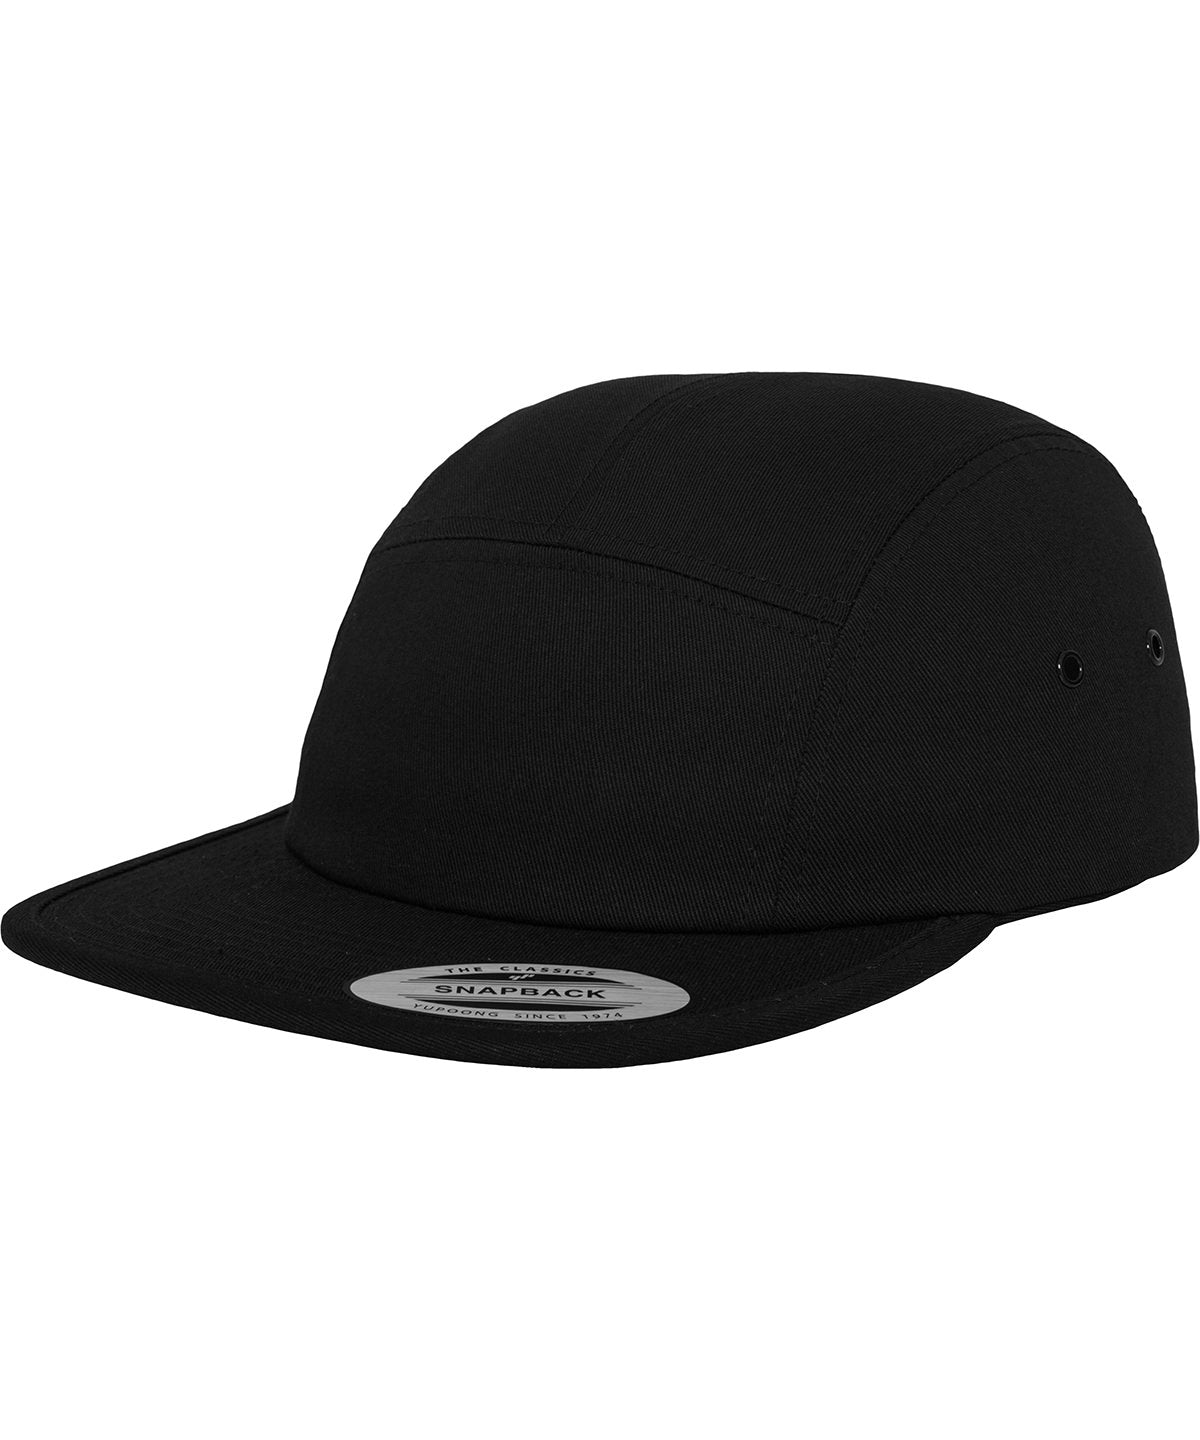 Black - Classic 5-panel jockey cap (7005) Caps Flexfit by Yupoong Headwear, Must Haves, New Colours for 2023, Rebrandable Schoolwear Centres